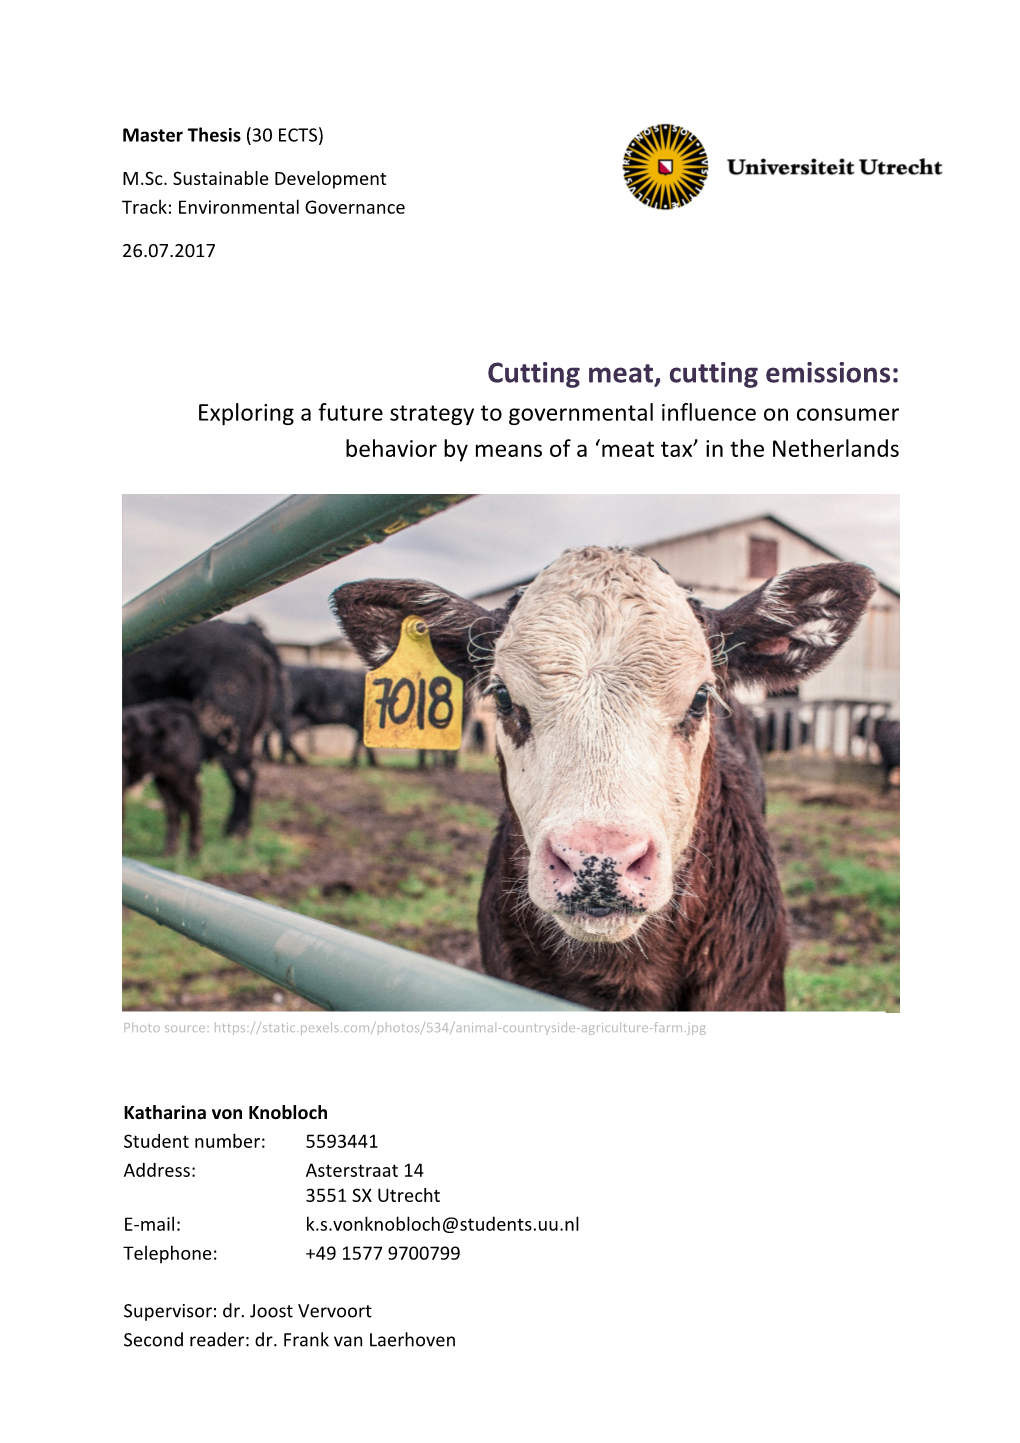 Cutting Meat, Cutting Emissions: Exploring a Future Strategy to Governmental Influence on Consumer Behavior by Means of a ‘Meat Tax’ in the Netherlands